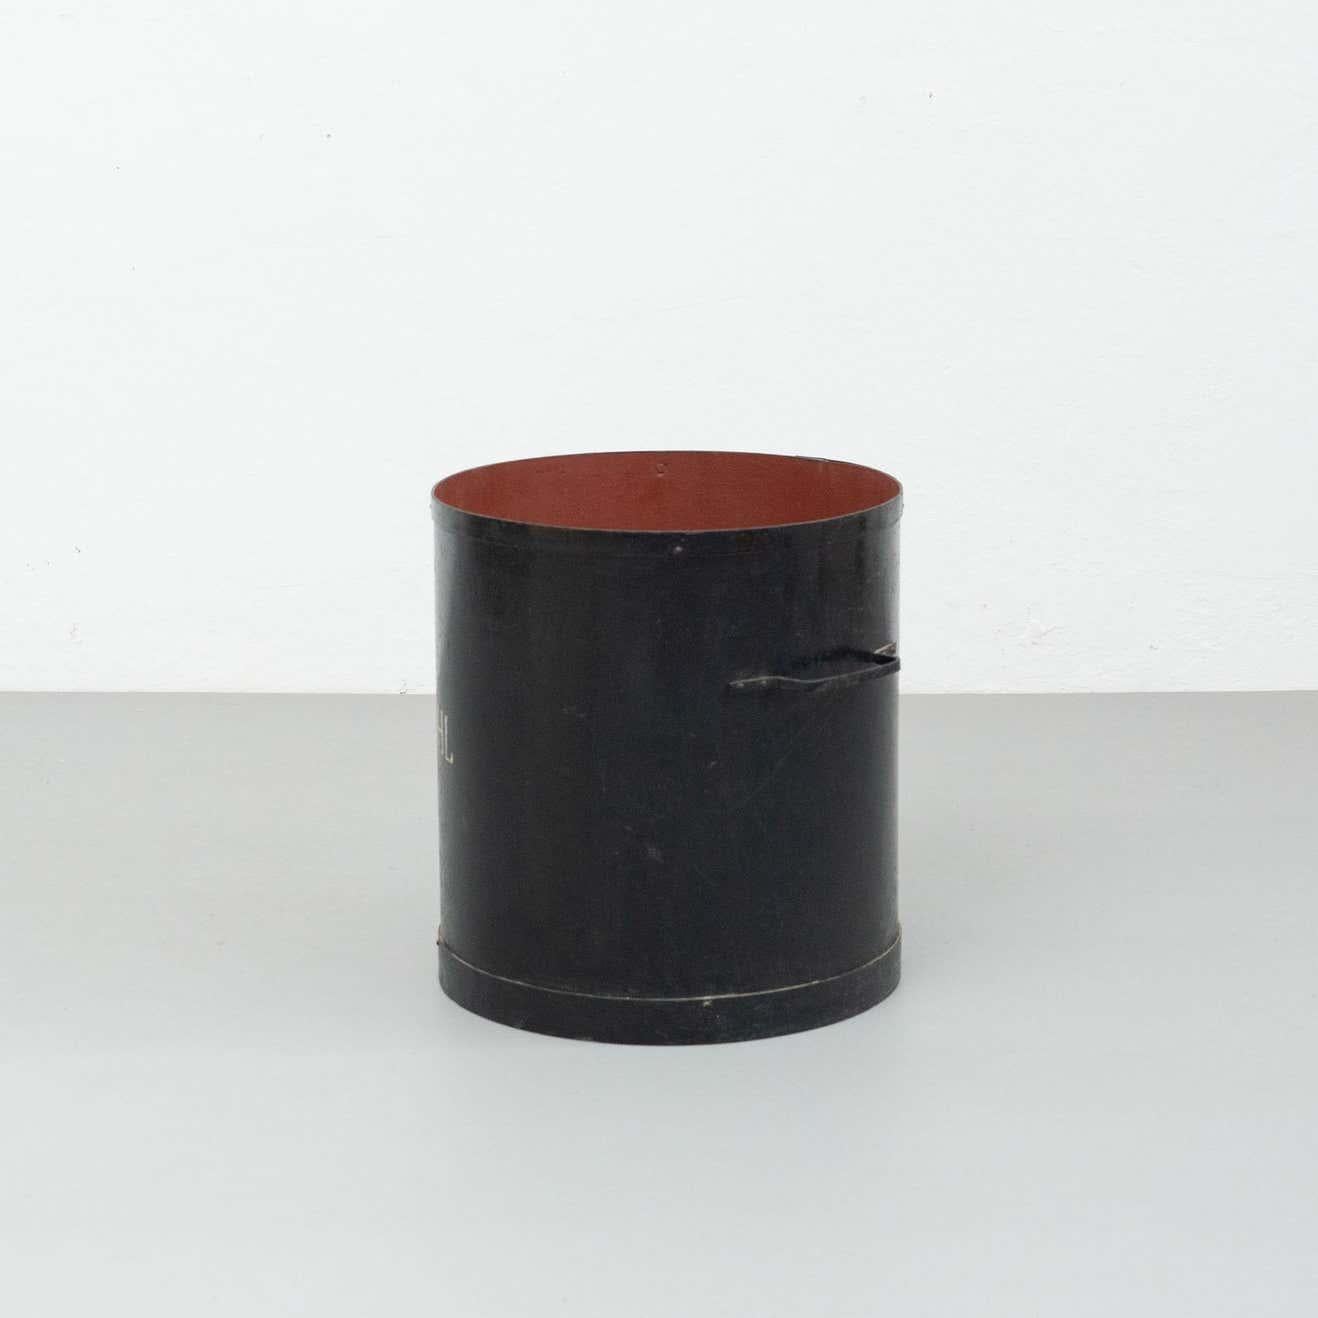 Black vintage metal bin.
By unknown manufacturer from France, circa 20th century.

In original condition, with minor wear consistent with age and use, preserving a beautiful patina.

Material:
Metal

Dimensions:
D 43 cm x W 50 cm x H 45 cm.